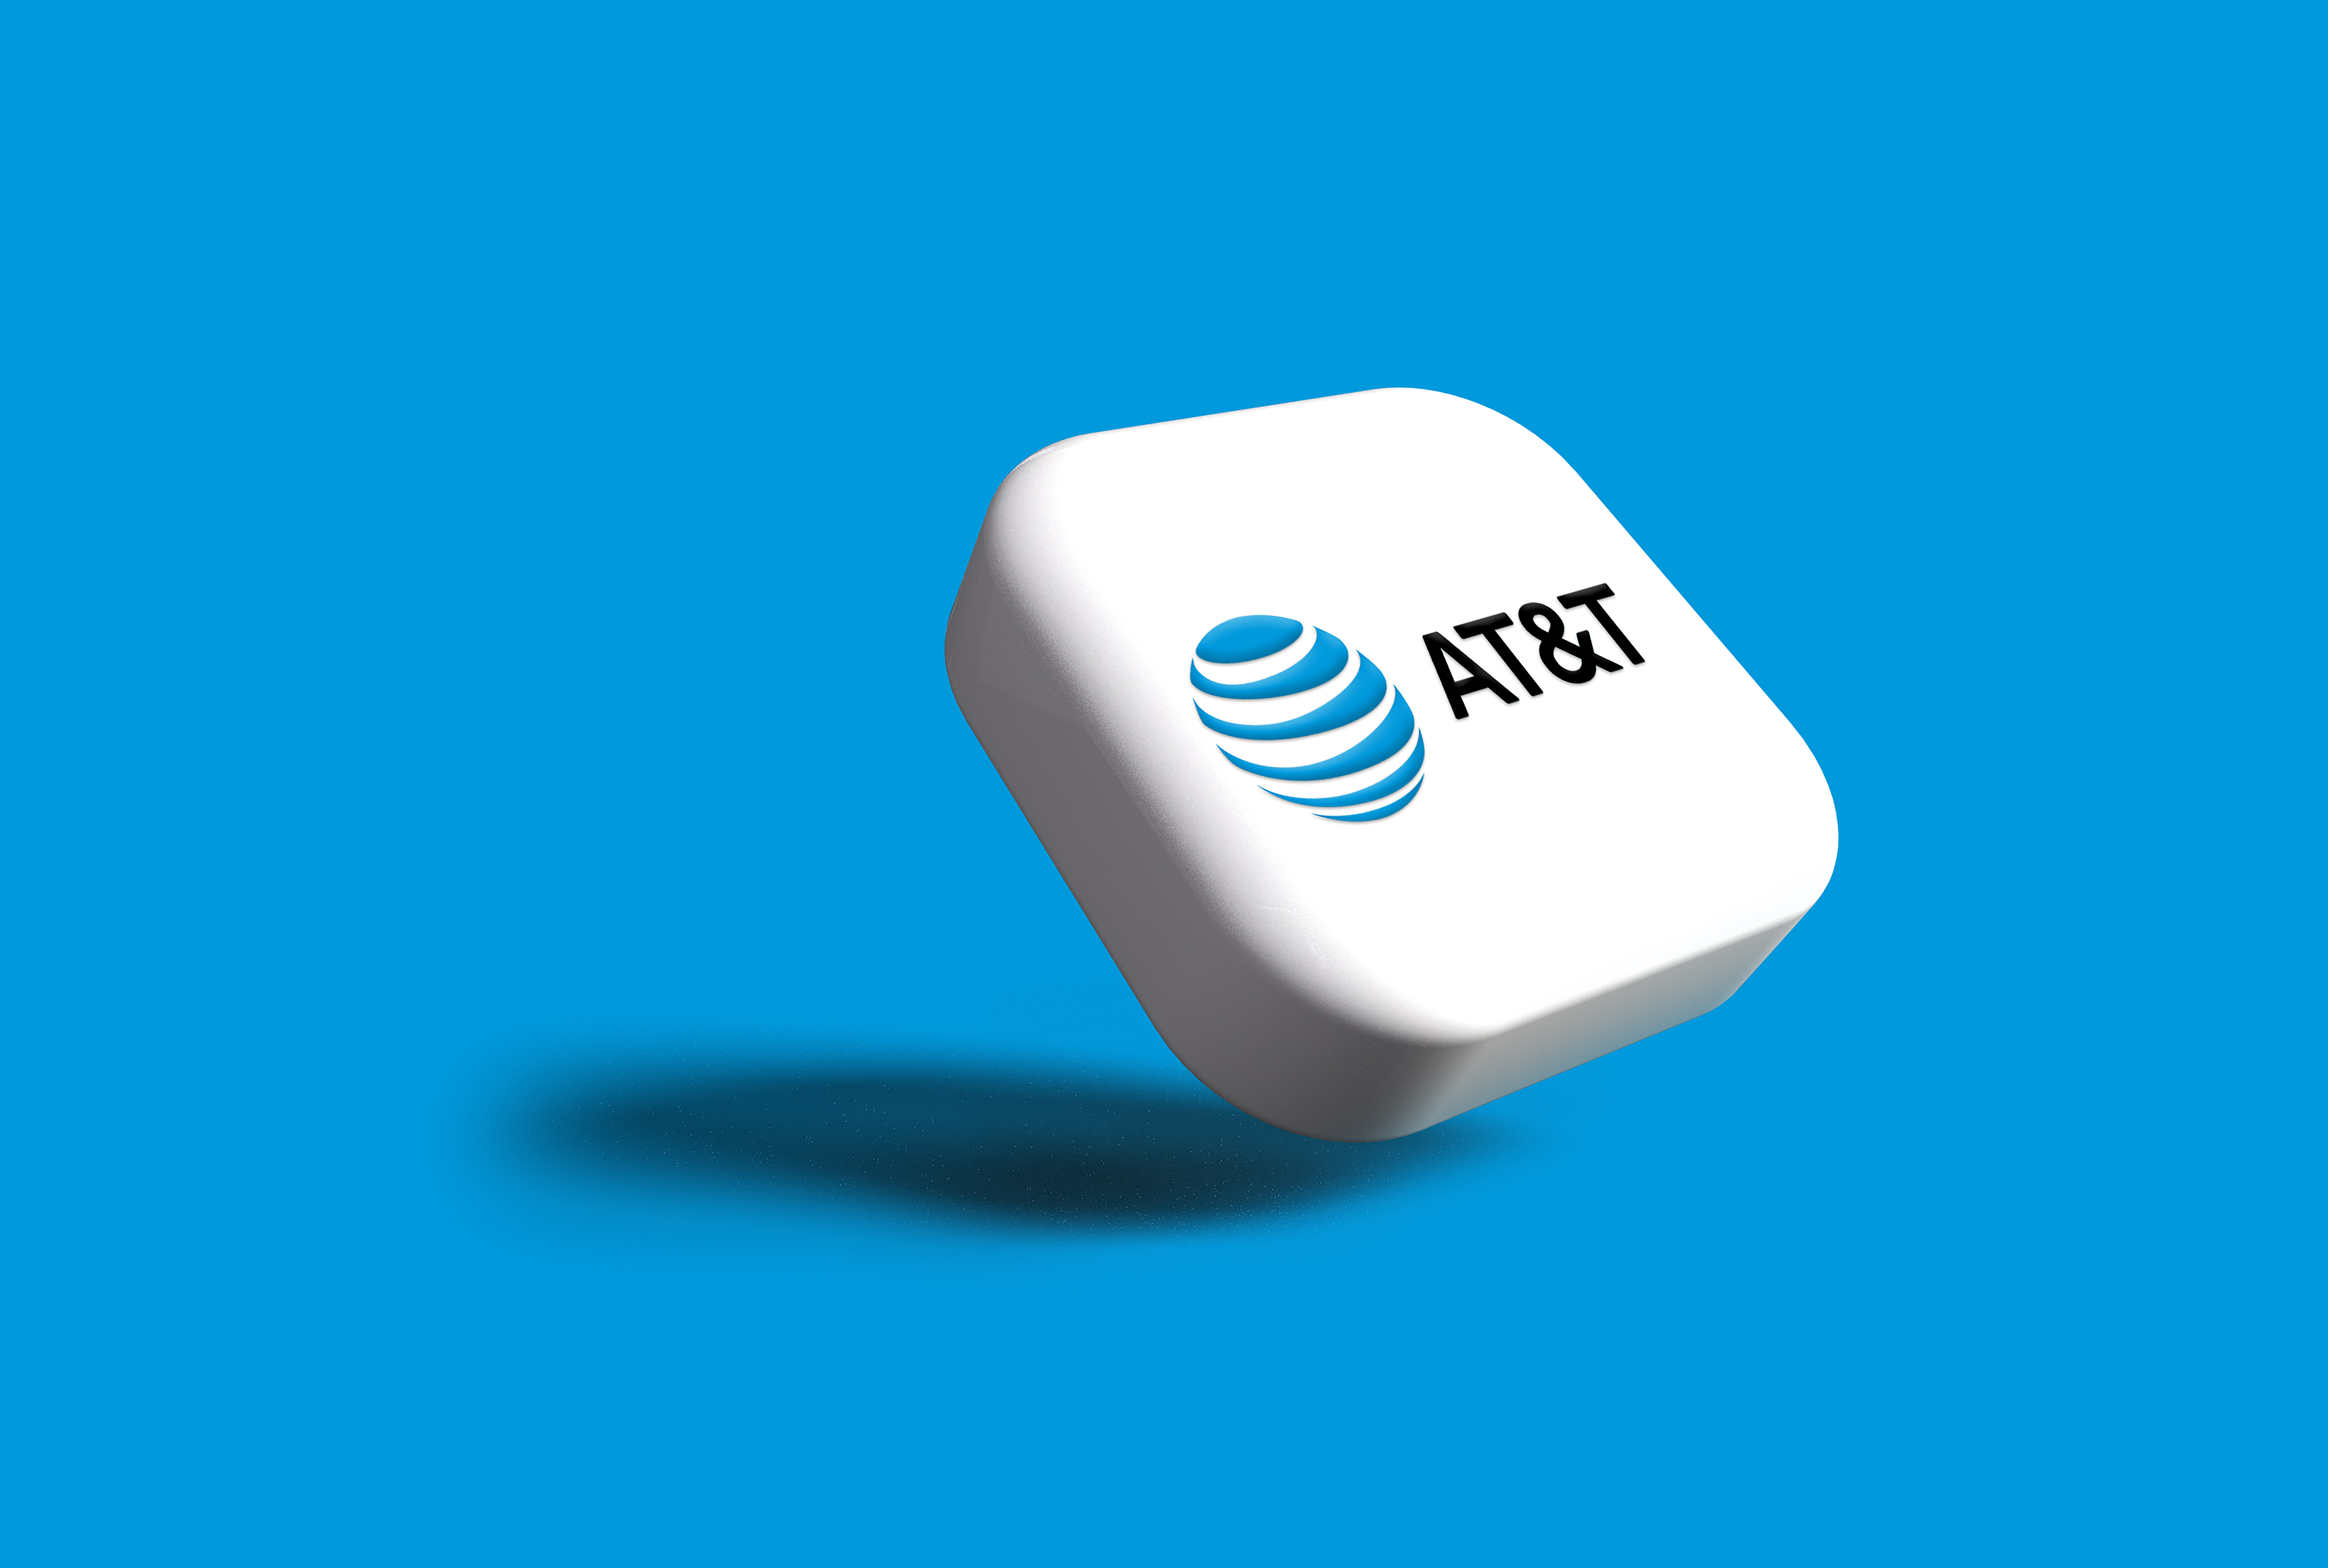 AT&T Expands 5G Home Internet With New ‘Internet Air’ Offering in 16 Markets